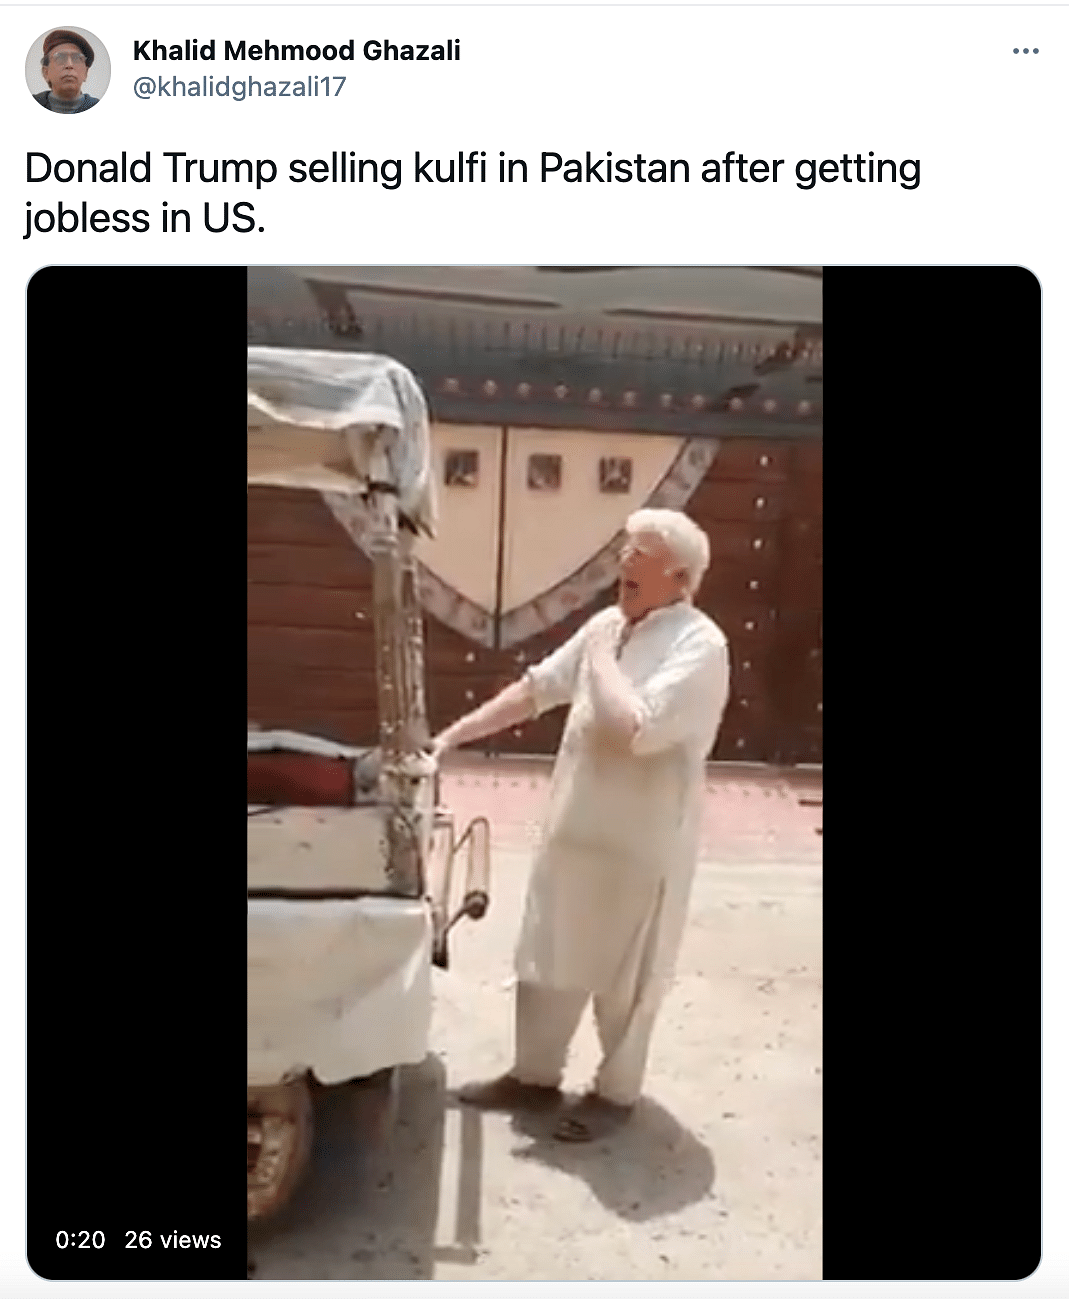 Donald Trump's doppelganger, a kulfi seller, was spotted in Sahiwal, Pakistan.